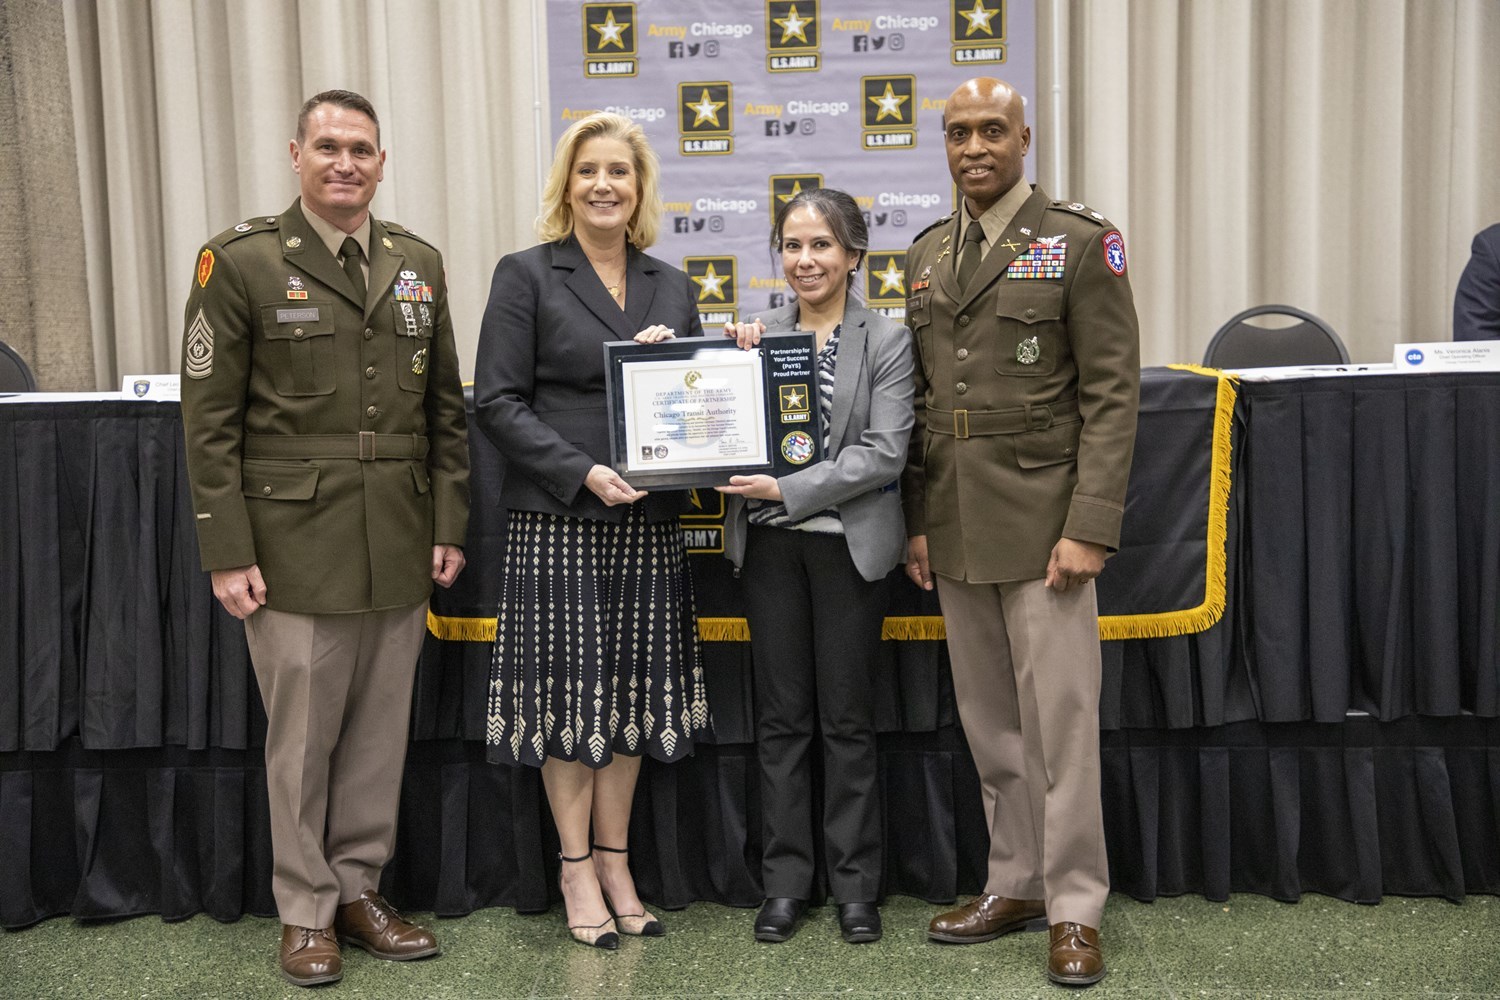 CTA 's Chief Operations Officer Vernoic Alanis joins the Secretary of the Army, Christine Wormuth, at the Army PaYs signing ceremony. 